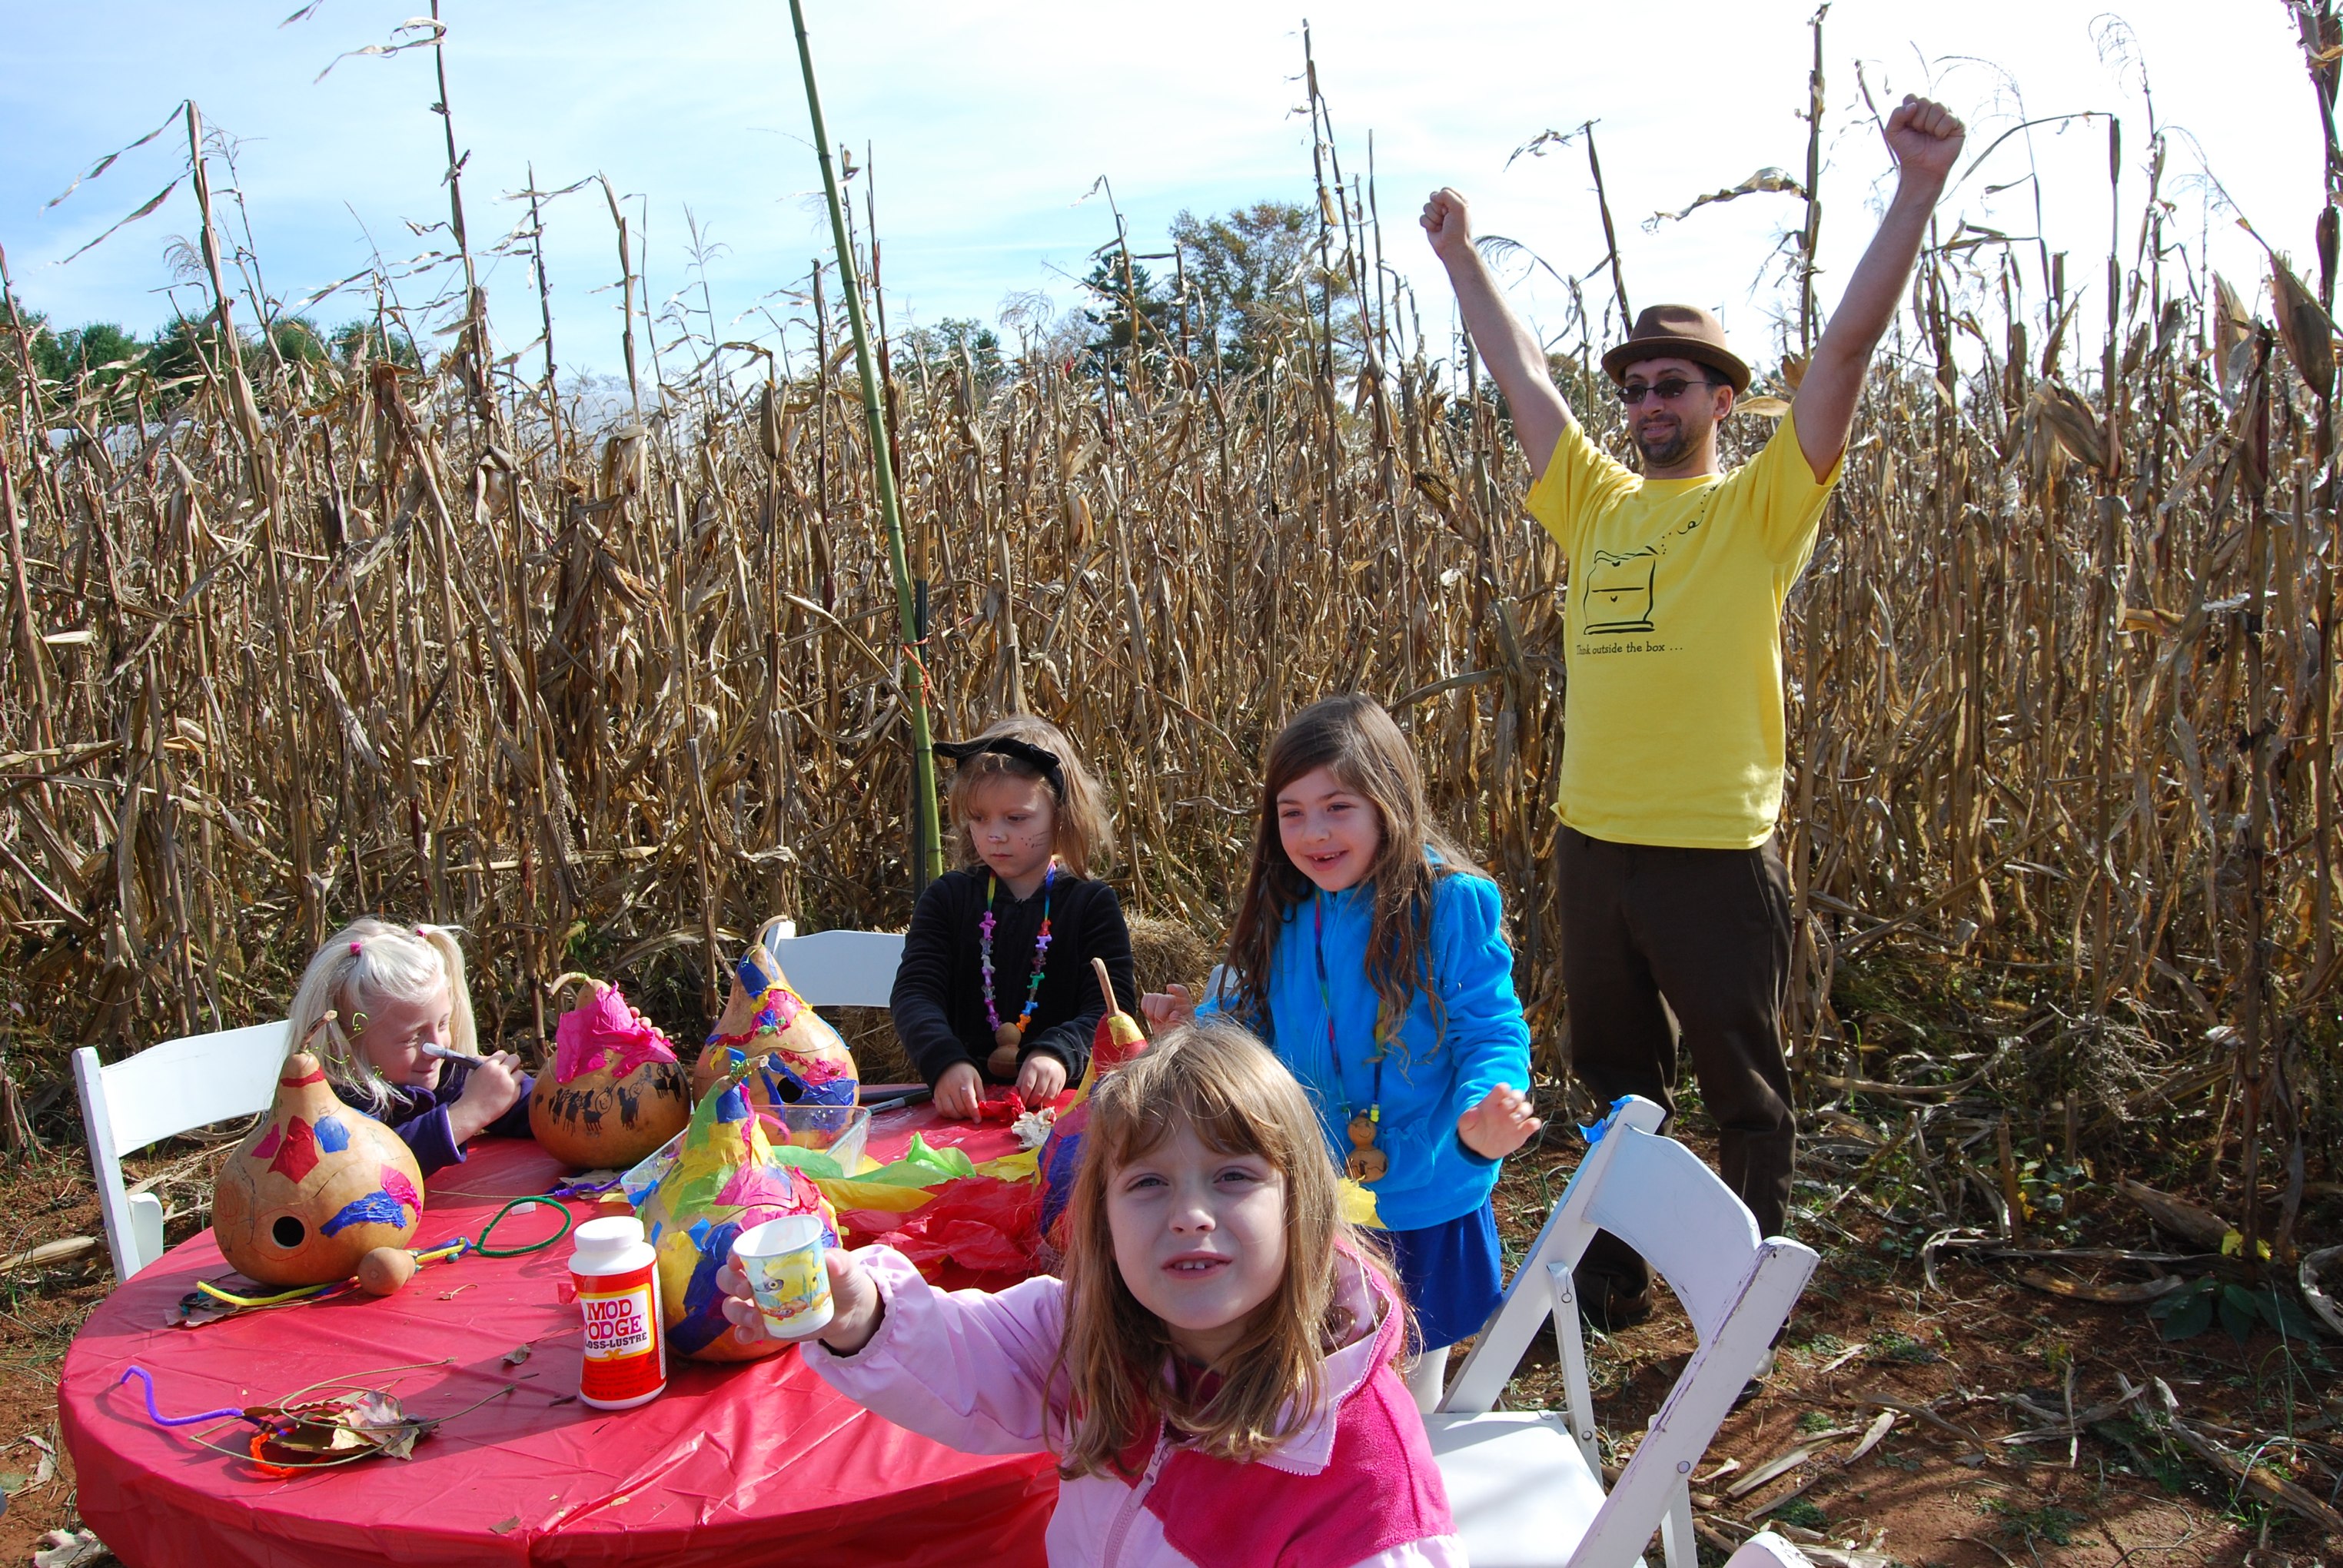 a[maize]ing corn maze party w/ gourd fairy houses!